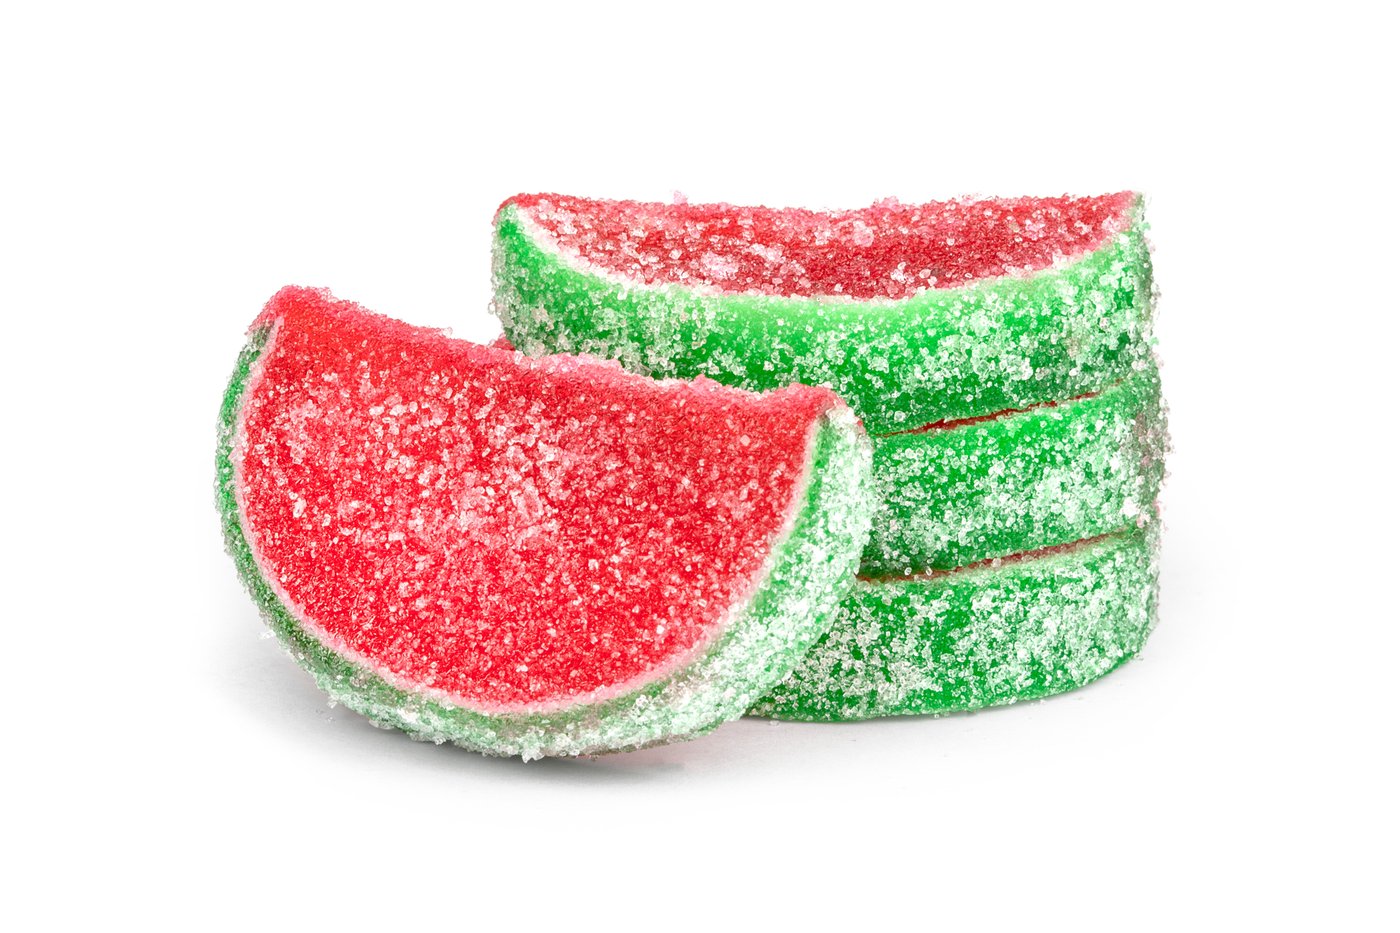 Watermelon Fruit Slices - Jelly Candy 